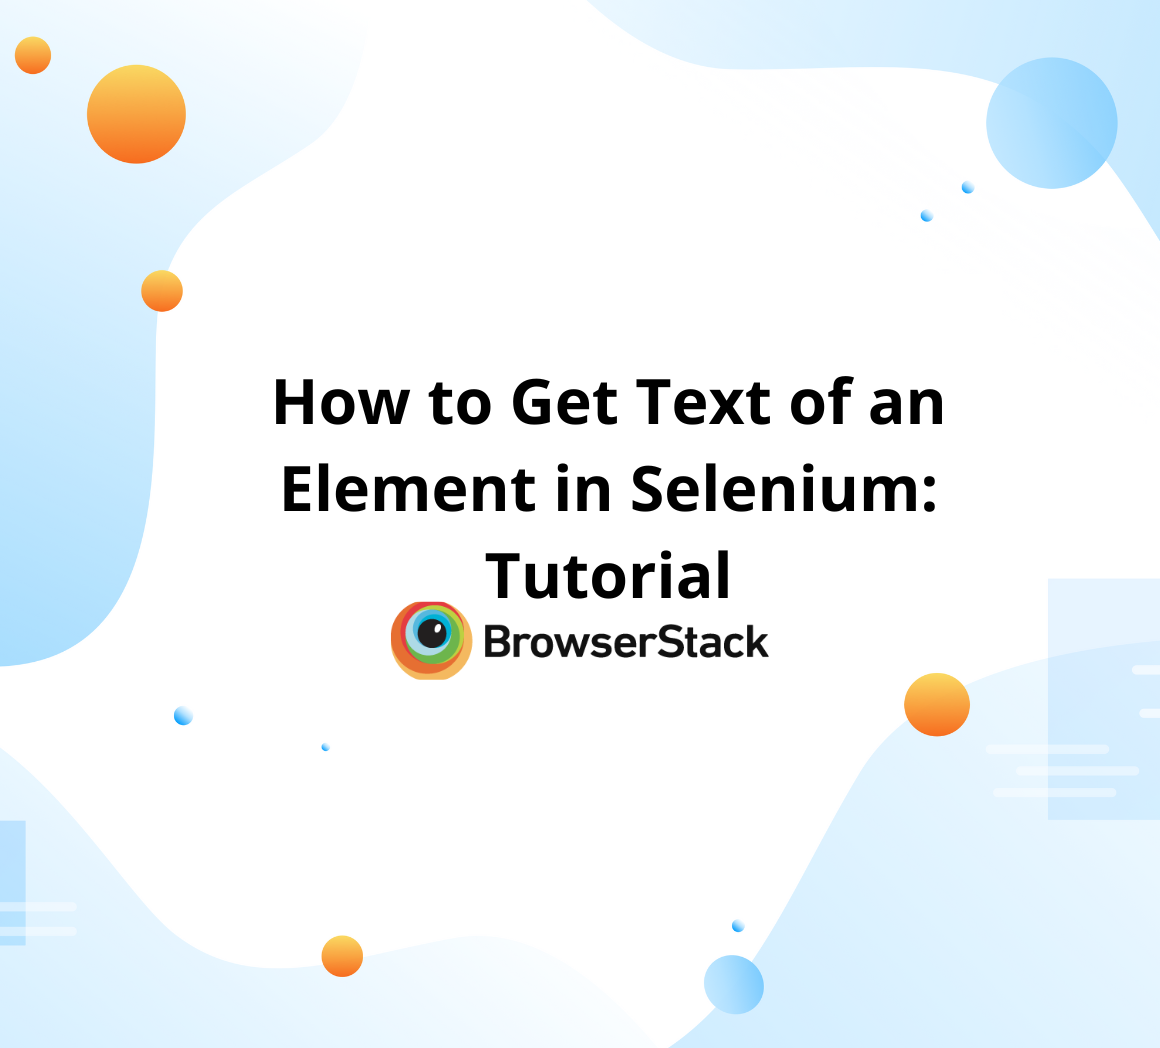 How to Get Text of an Element in Selenium